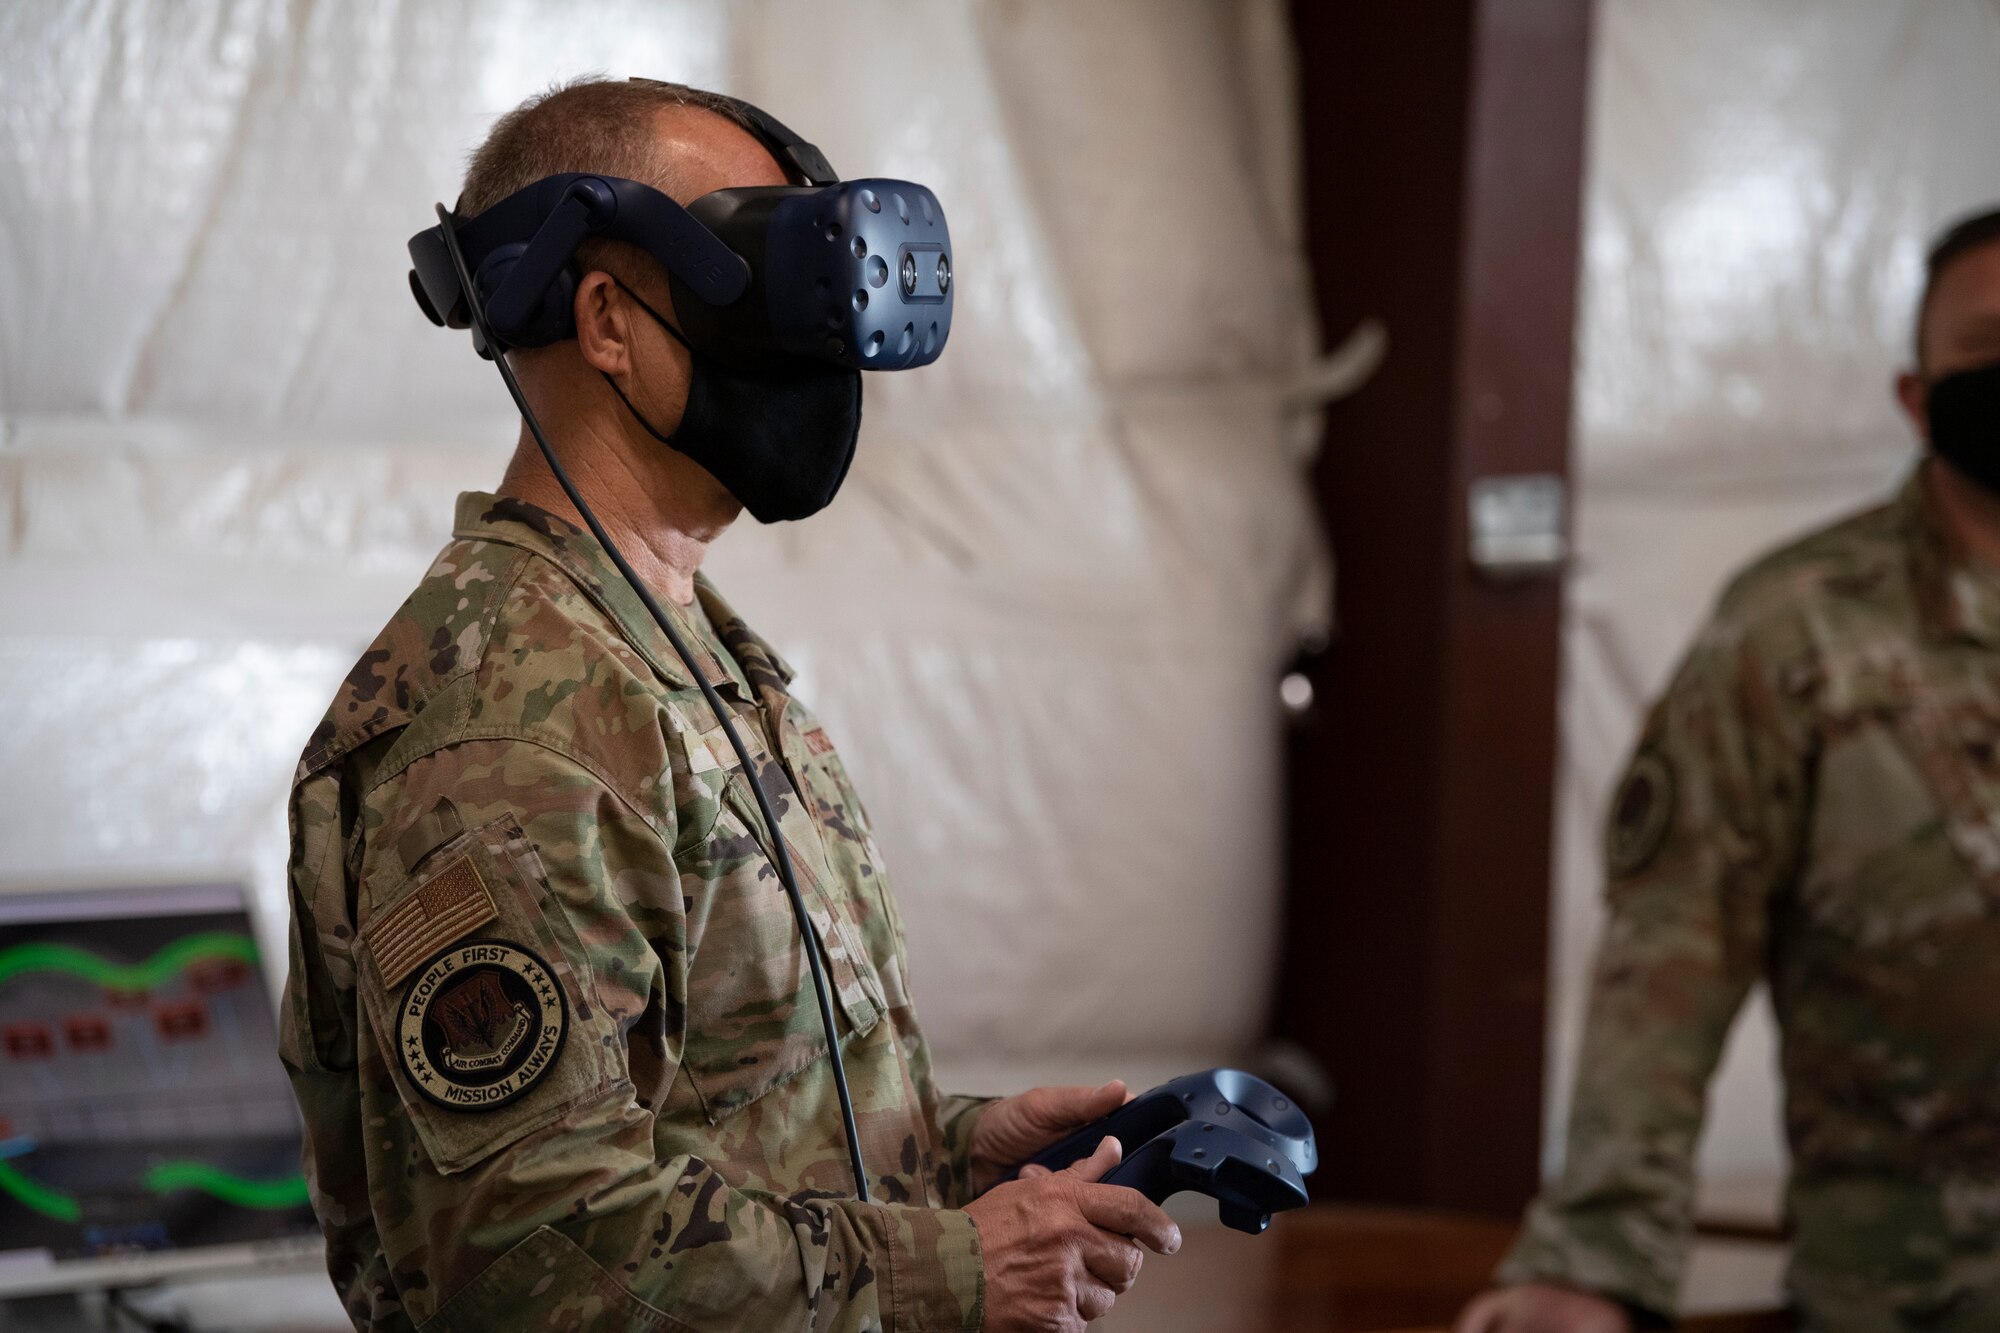 A photo of Gen. Kelly with a virtual reality headset on.